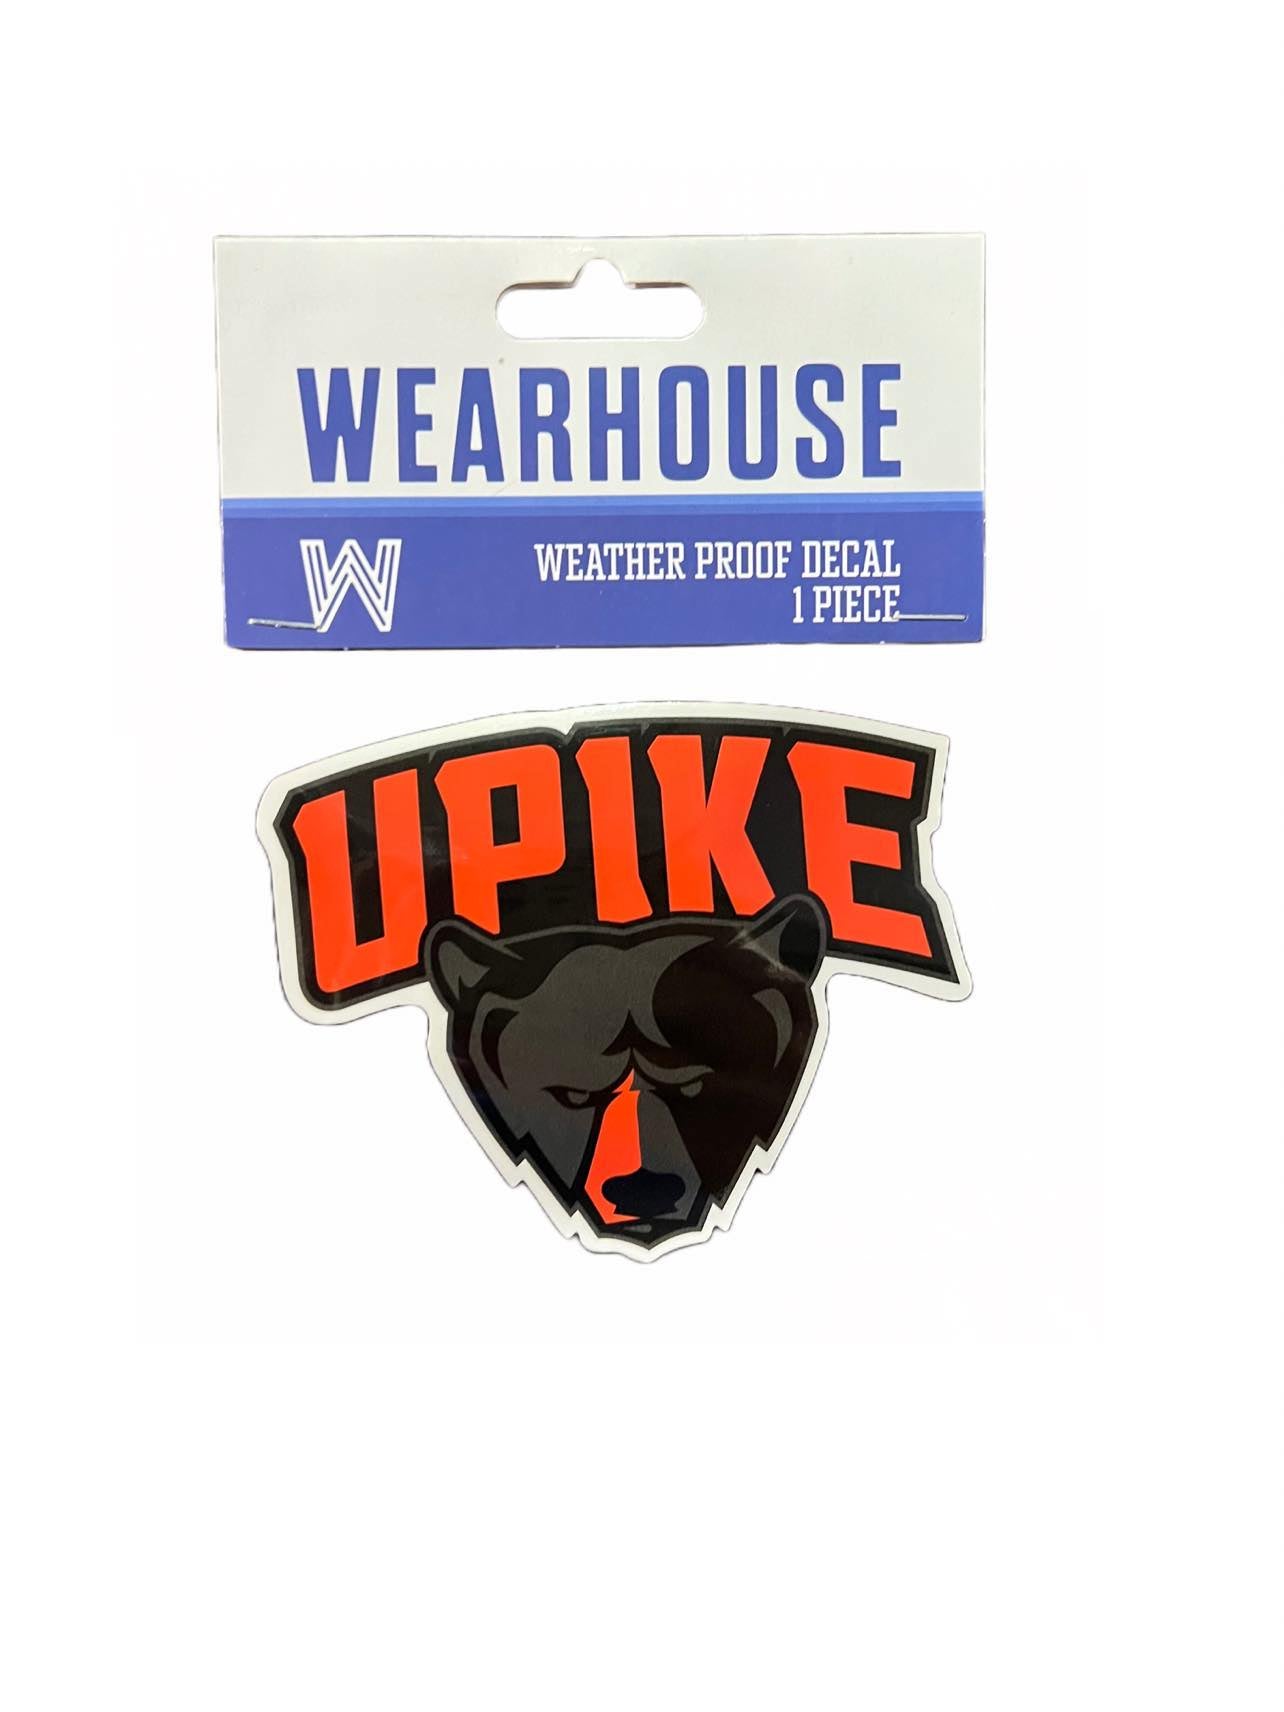 UPIKE Weather Proof Decal